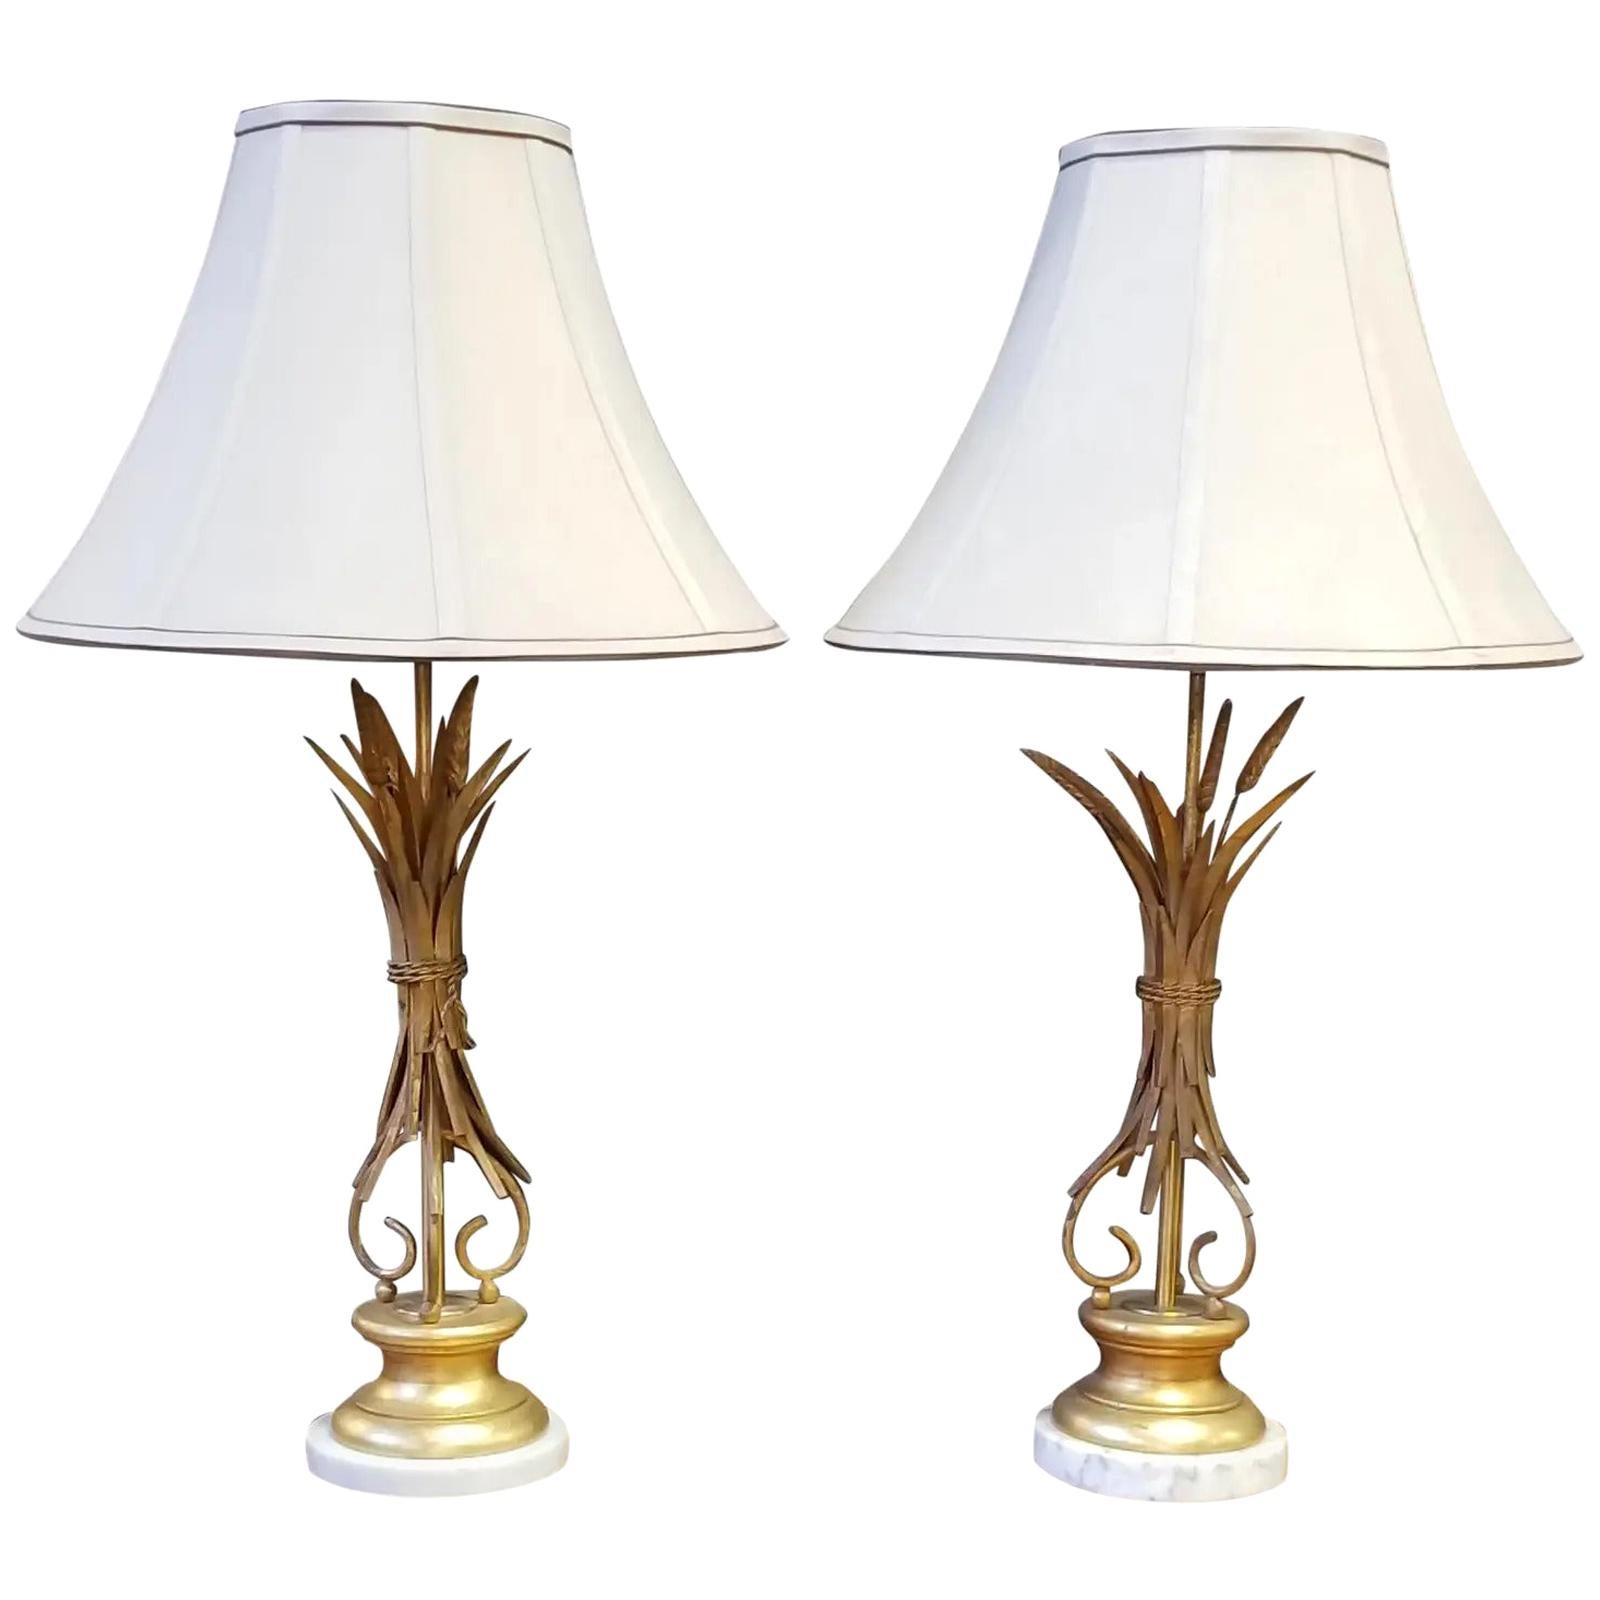 Sheaf of Wheat Hollywood Regency Lamps a Pair